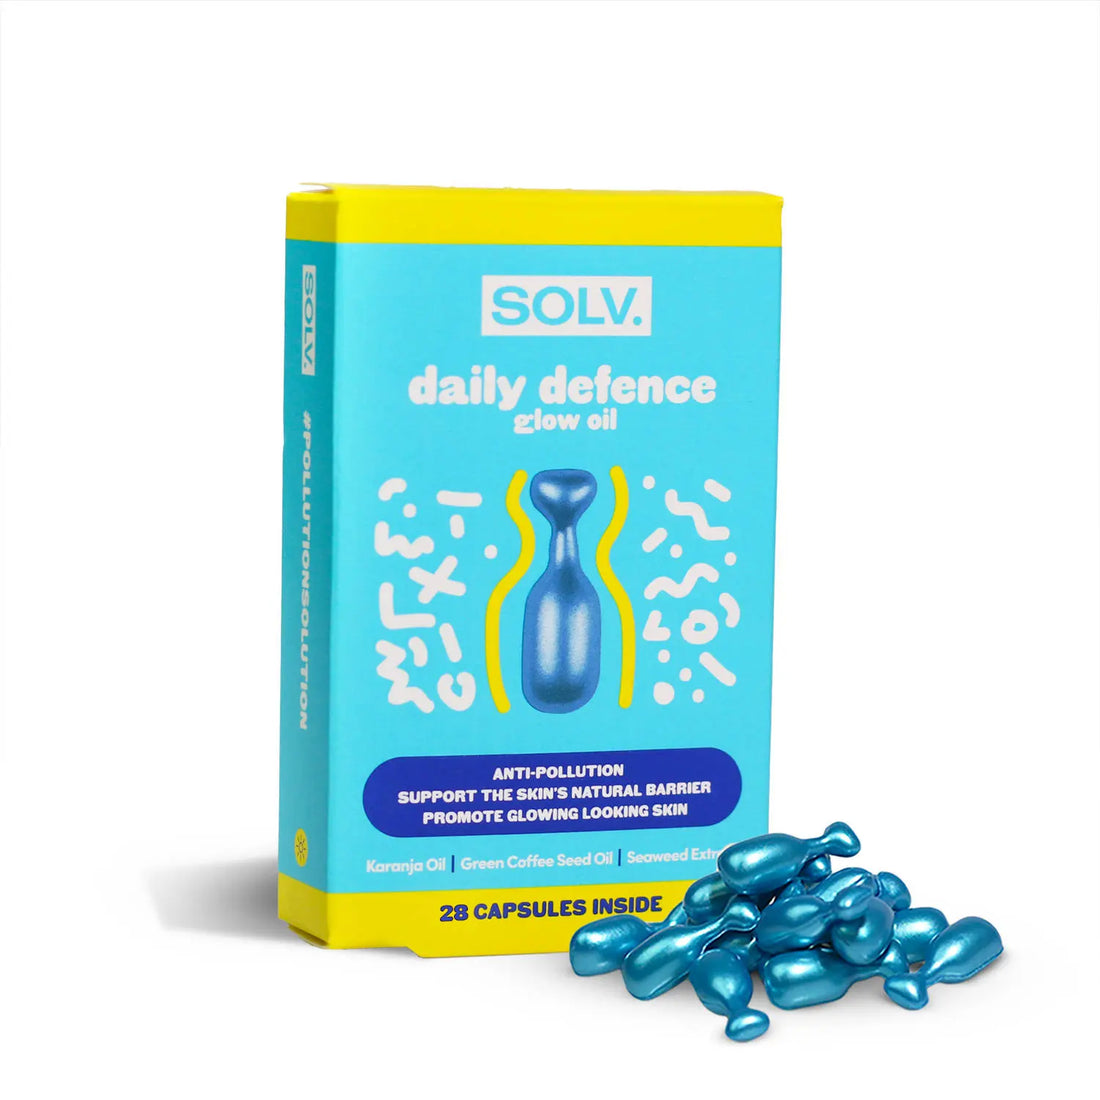 Solv. Daily Defence Glow Oil - 28 kapsula